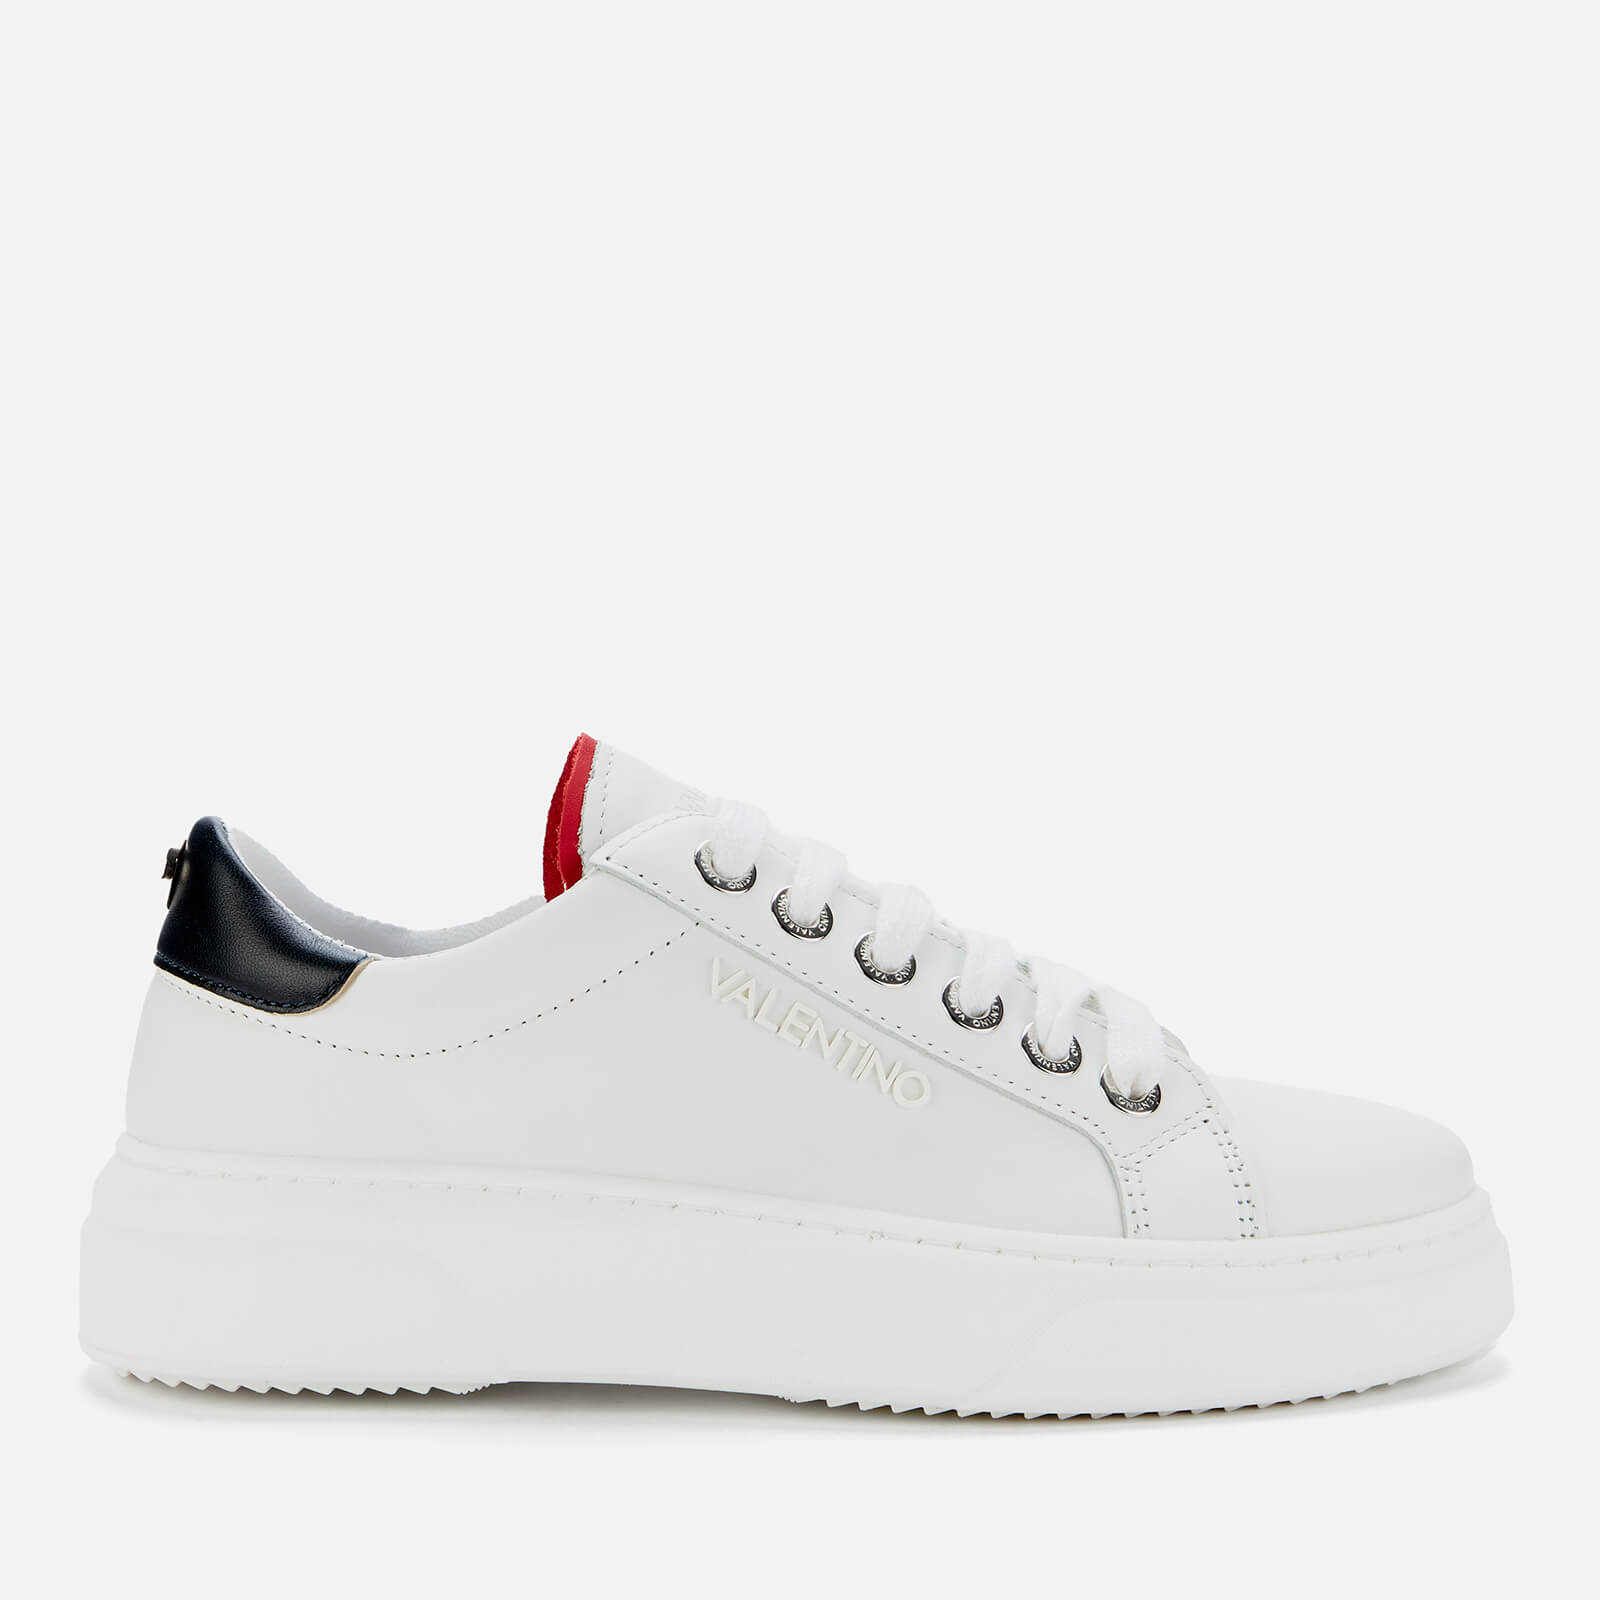 Valentino Shoes Women's Leather Chunky Trainers - White/Blue/Red - UK 3